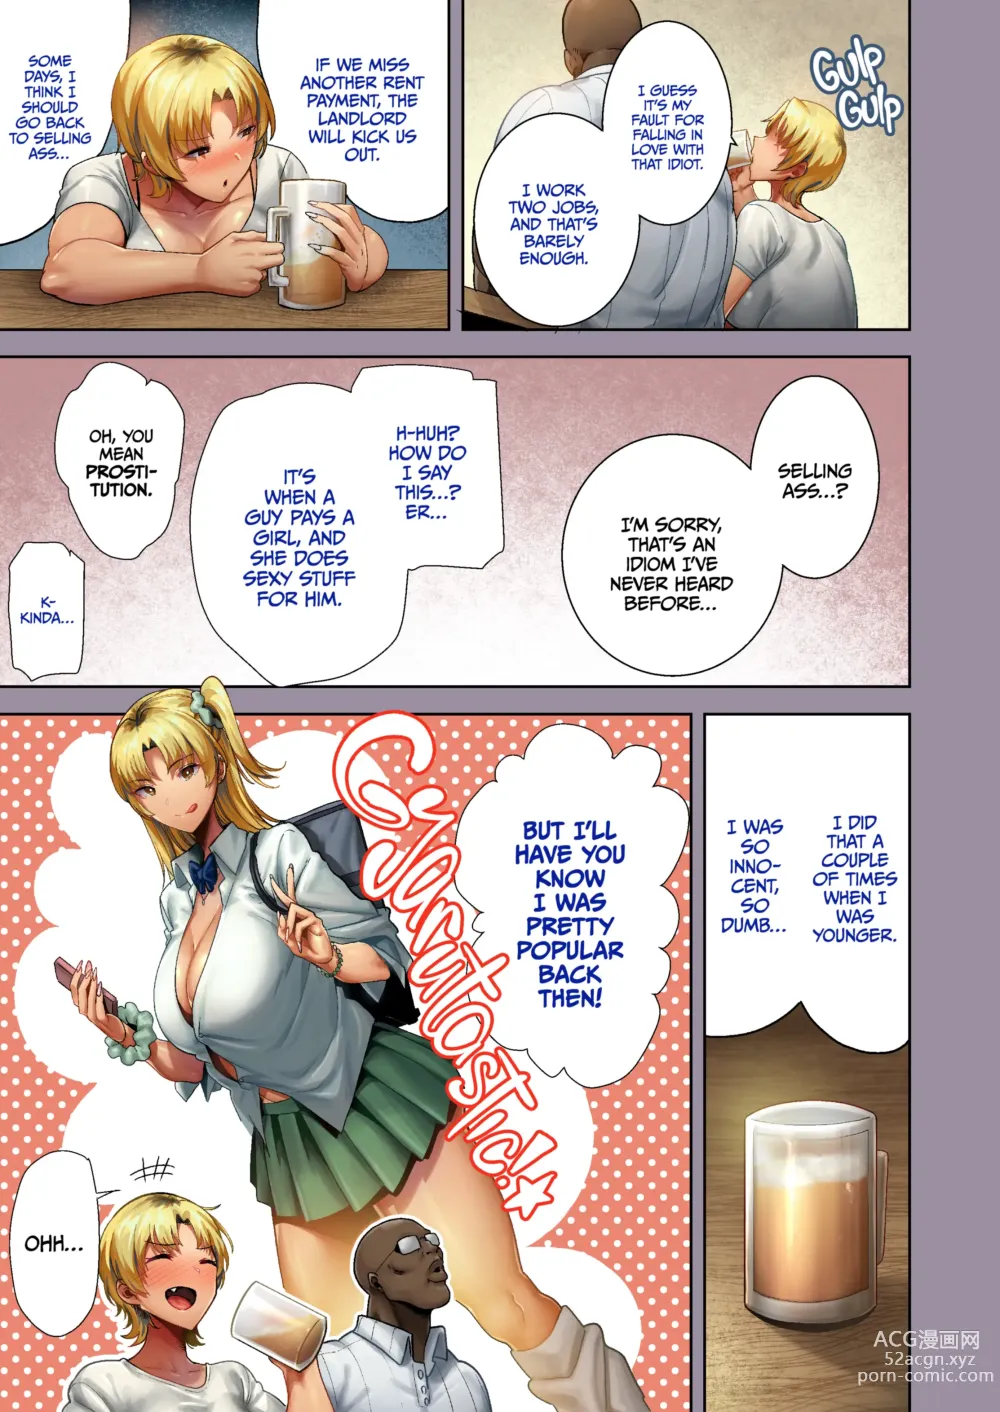 Page 12 of doujinshi How to Get With Japanese Housewives the Wild Way 2